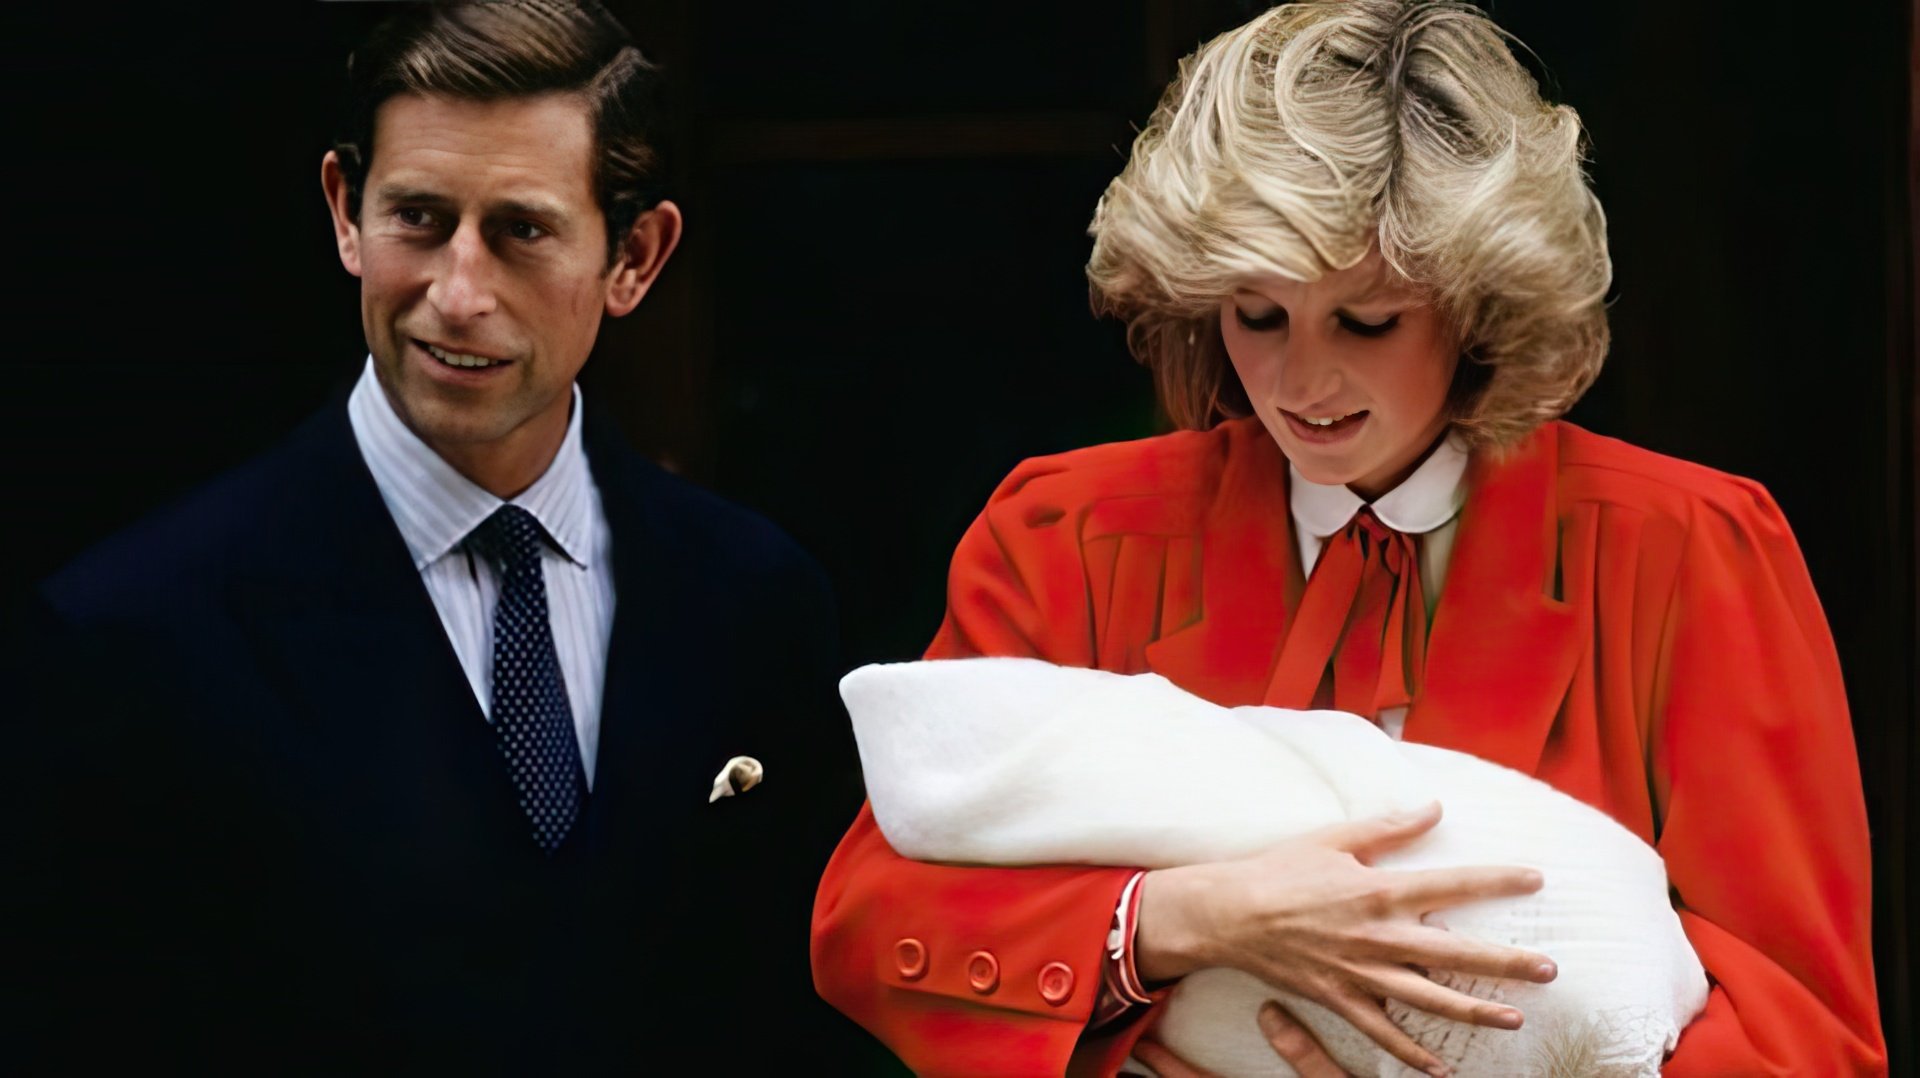 Harry is the youngest son of Charles, Prince of Wales and Diana, Princess of Wales